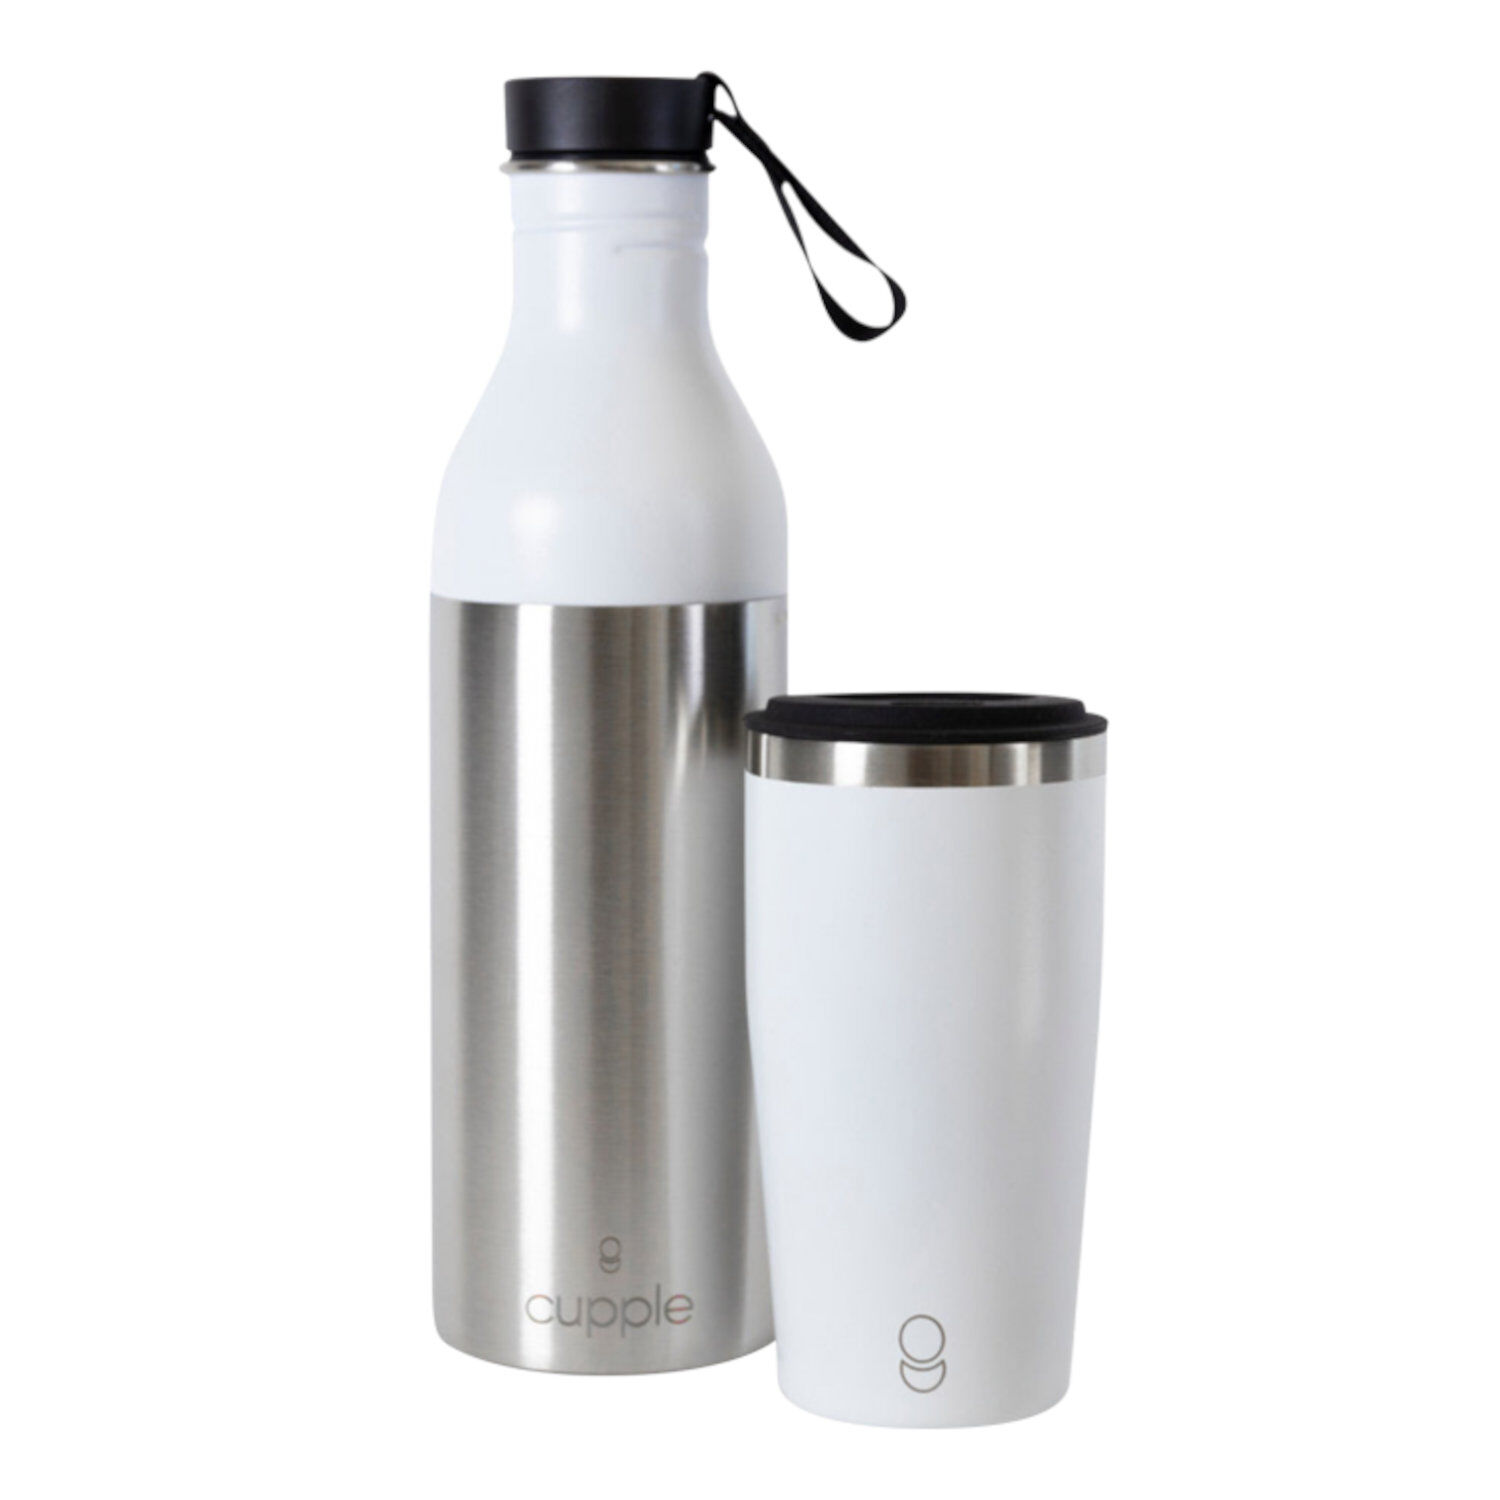 The Cupple Combined Bottle and Cup